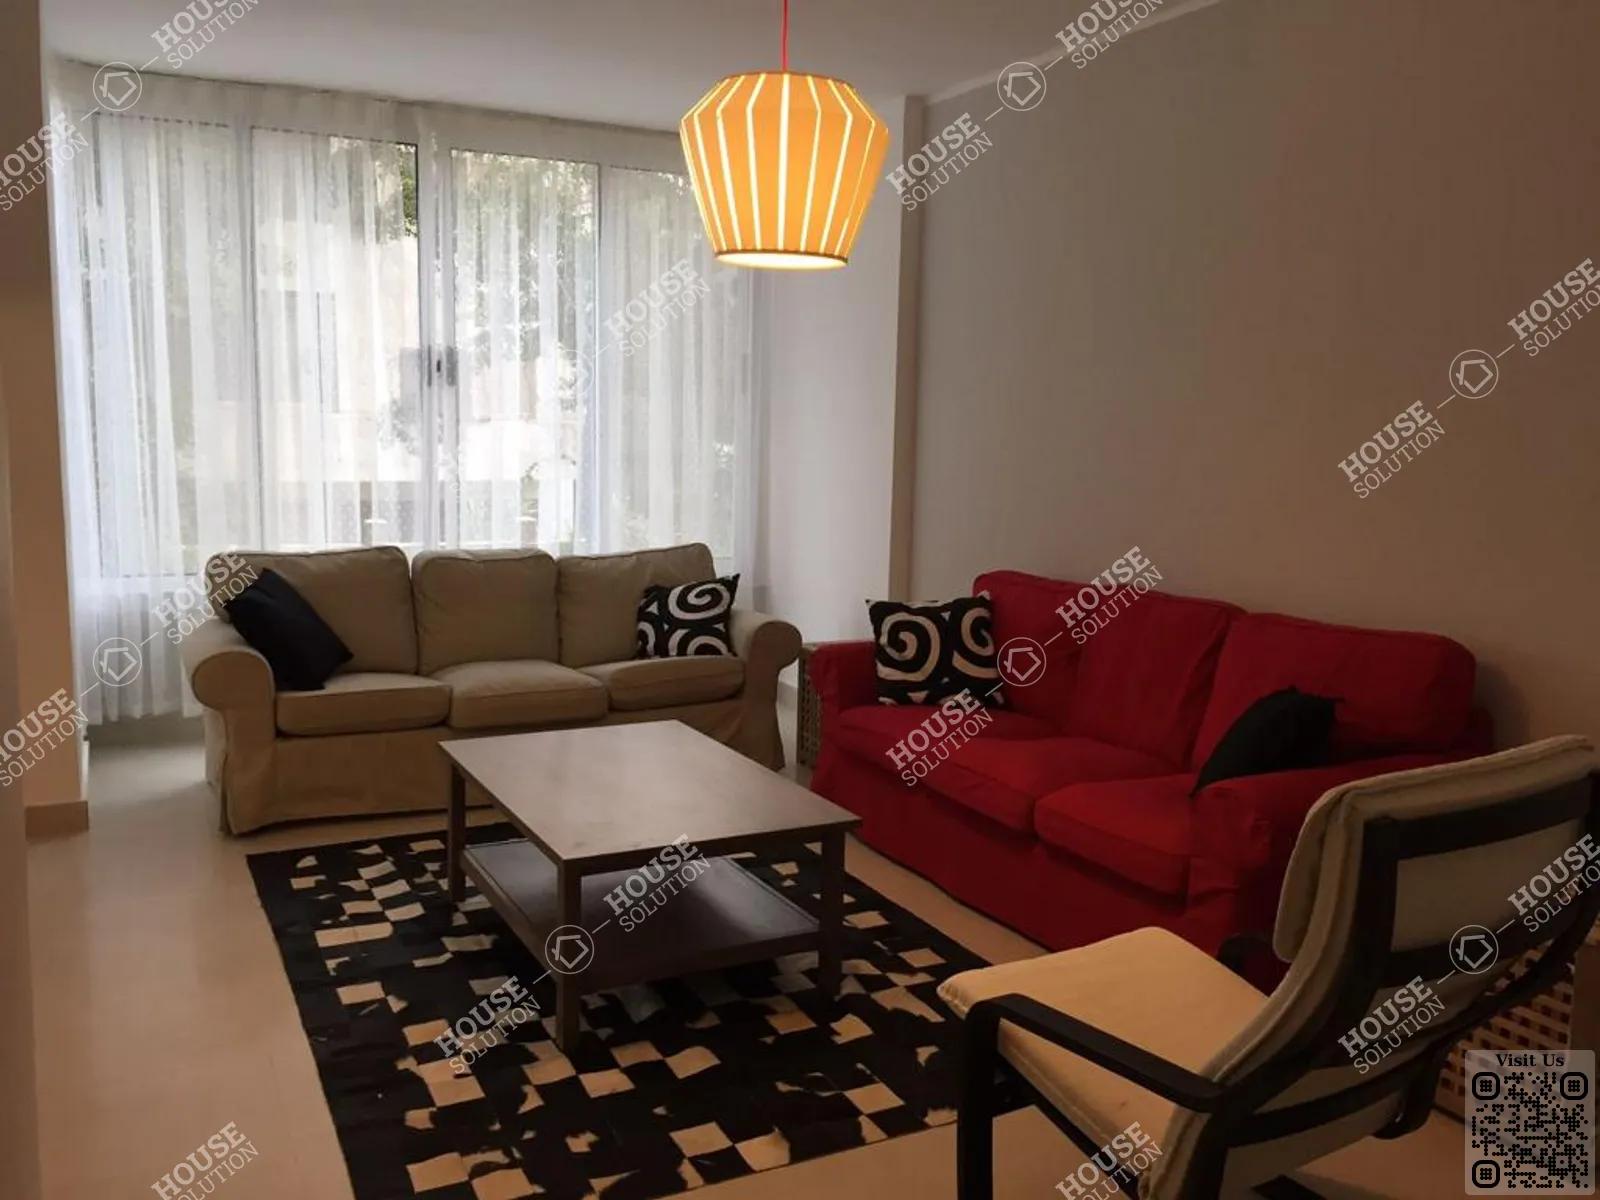 RECEPTION  @ Apartments For Rent In Maadi Maadi Sarayat Area: 160 m² consists of 3 Bedrooms 2 Bathrooms Modern furnished 5 stars #5469-0